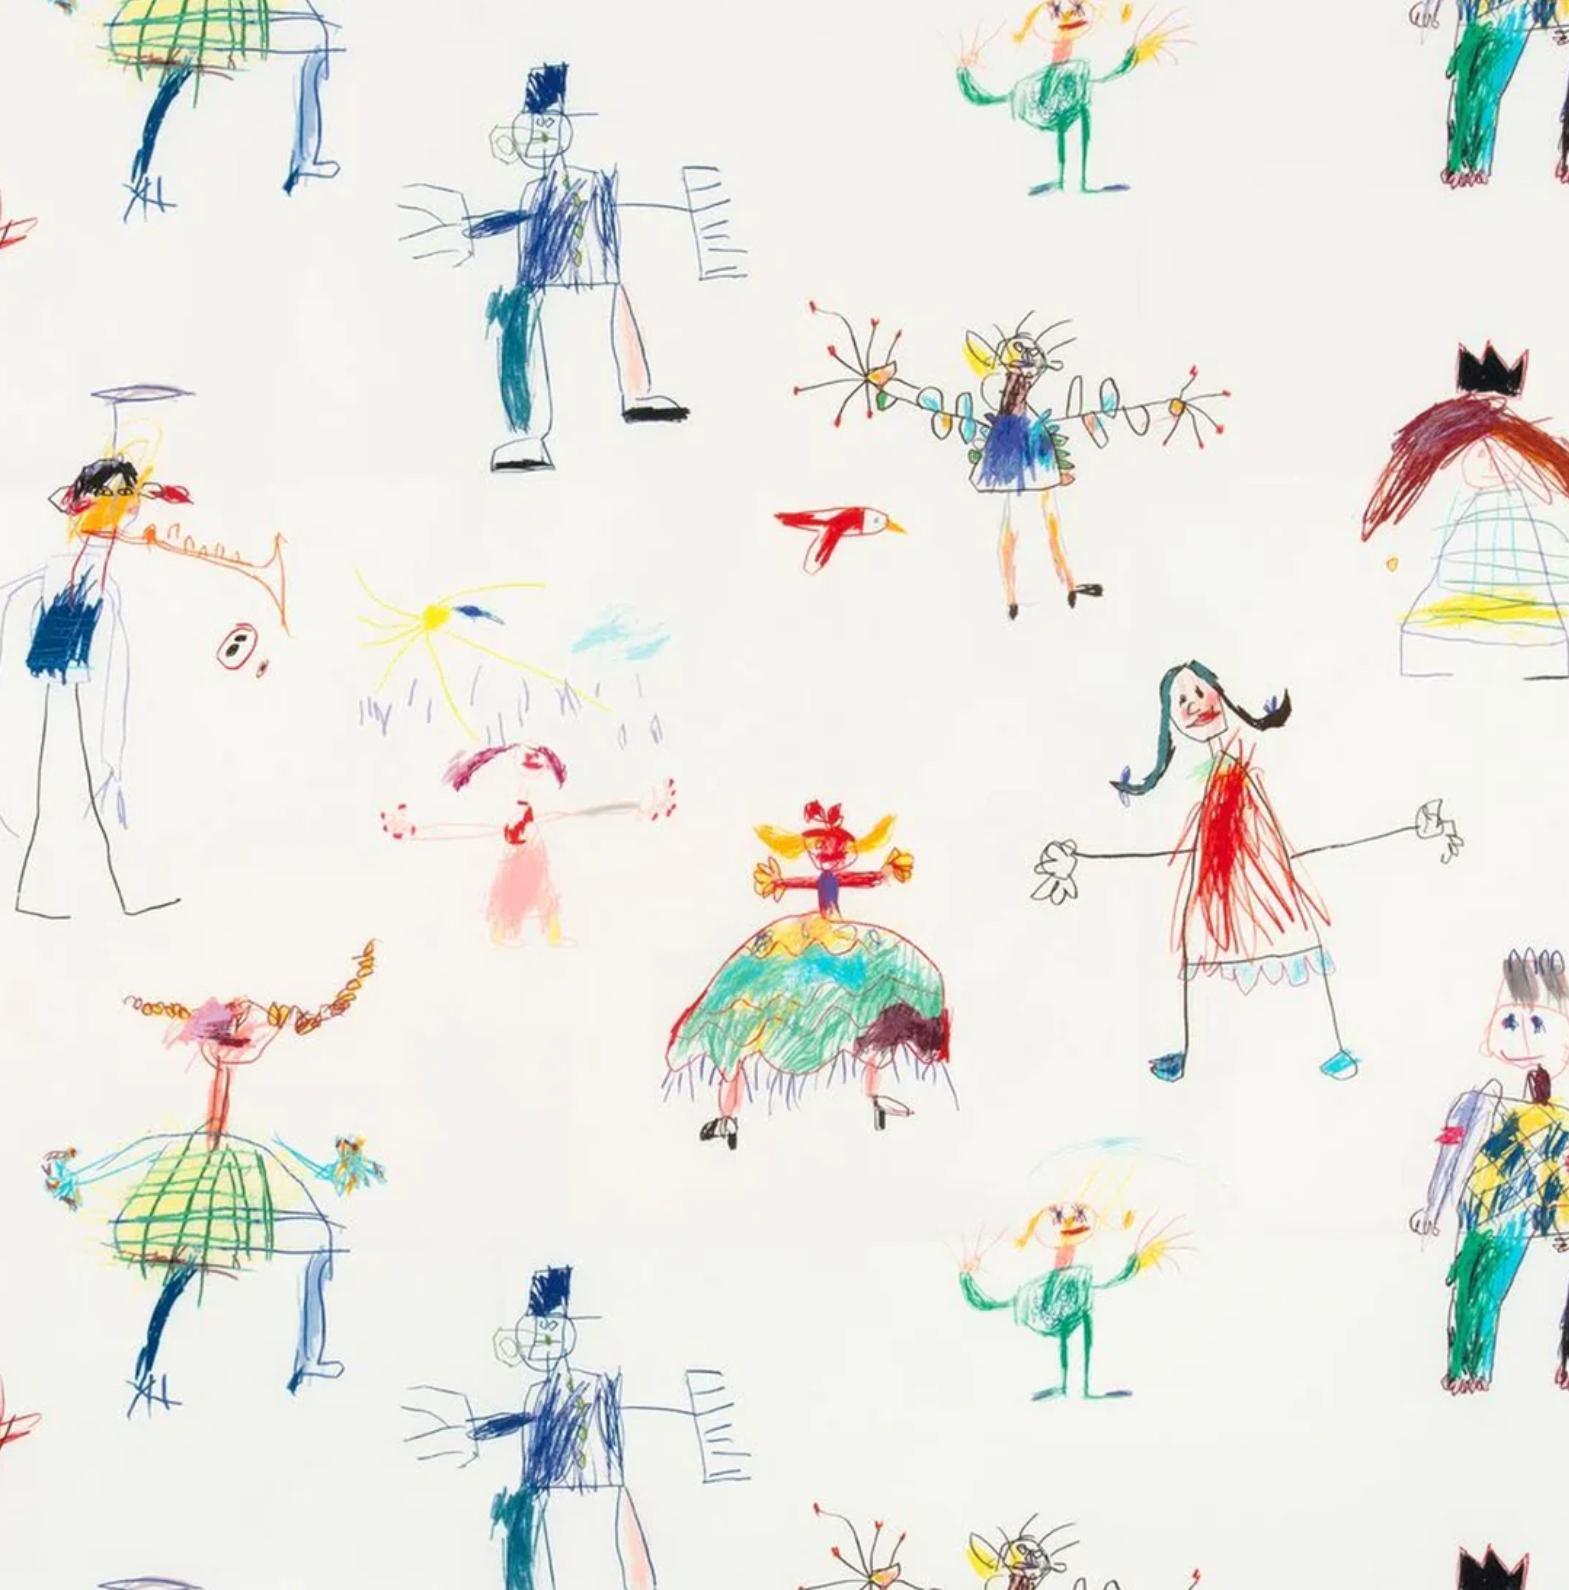 Pierre Frey Les Bidules FP341001 Scoubidou by Gael Davrinche. Made in France.  Listing is for one roll (11 yards). 

This print, designed by Gaël Davrinche, a contemporary artist who strives to evoke the innocence of childhood in his creations,